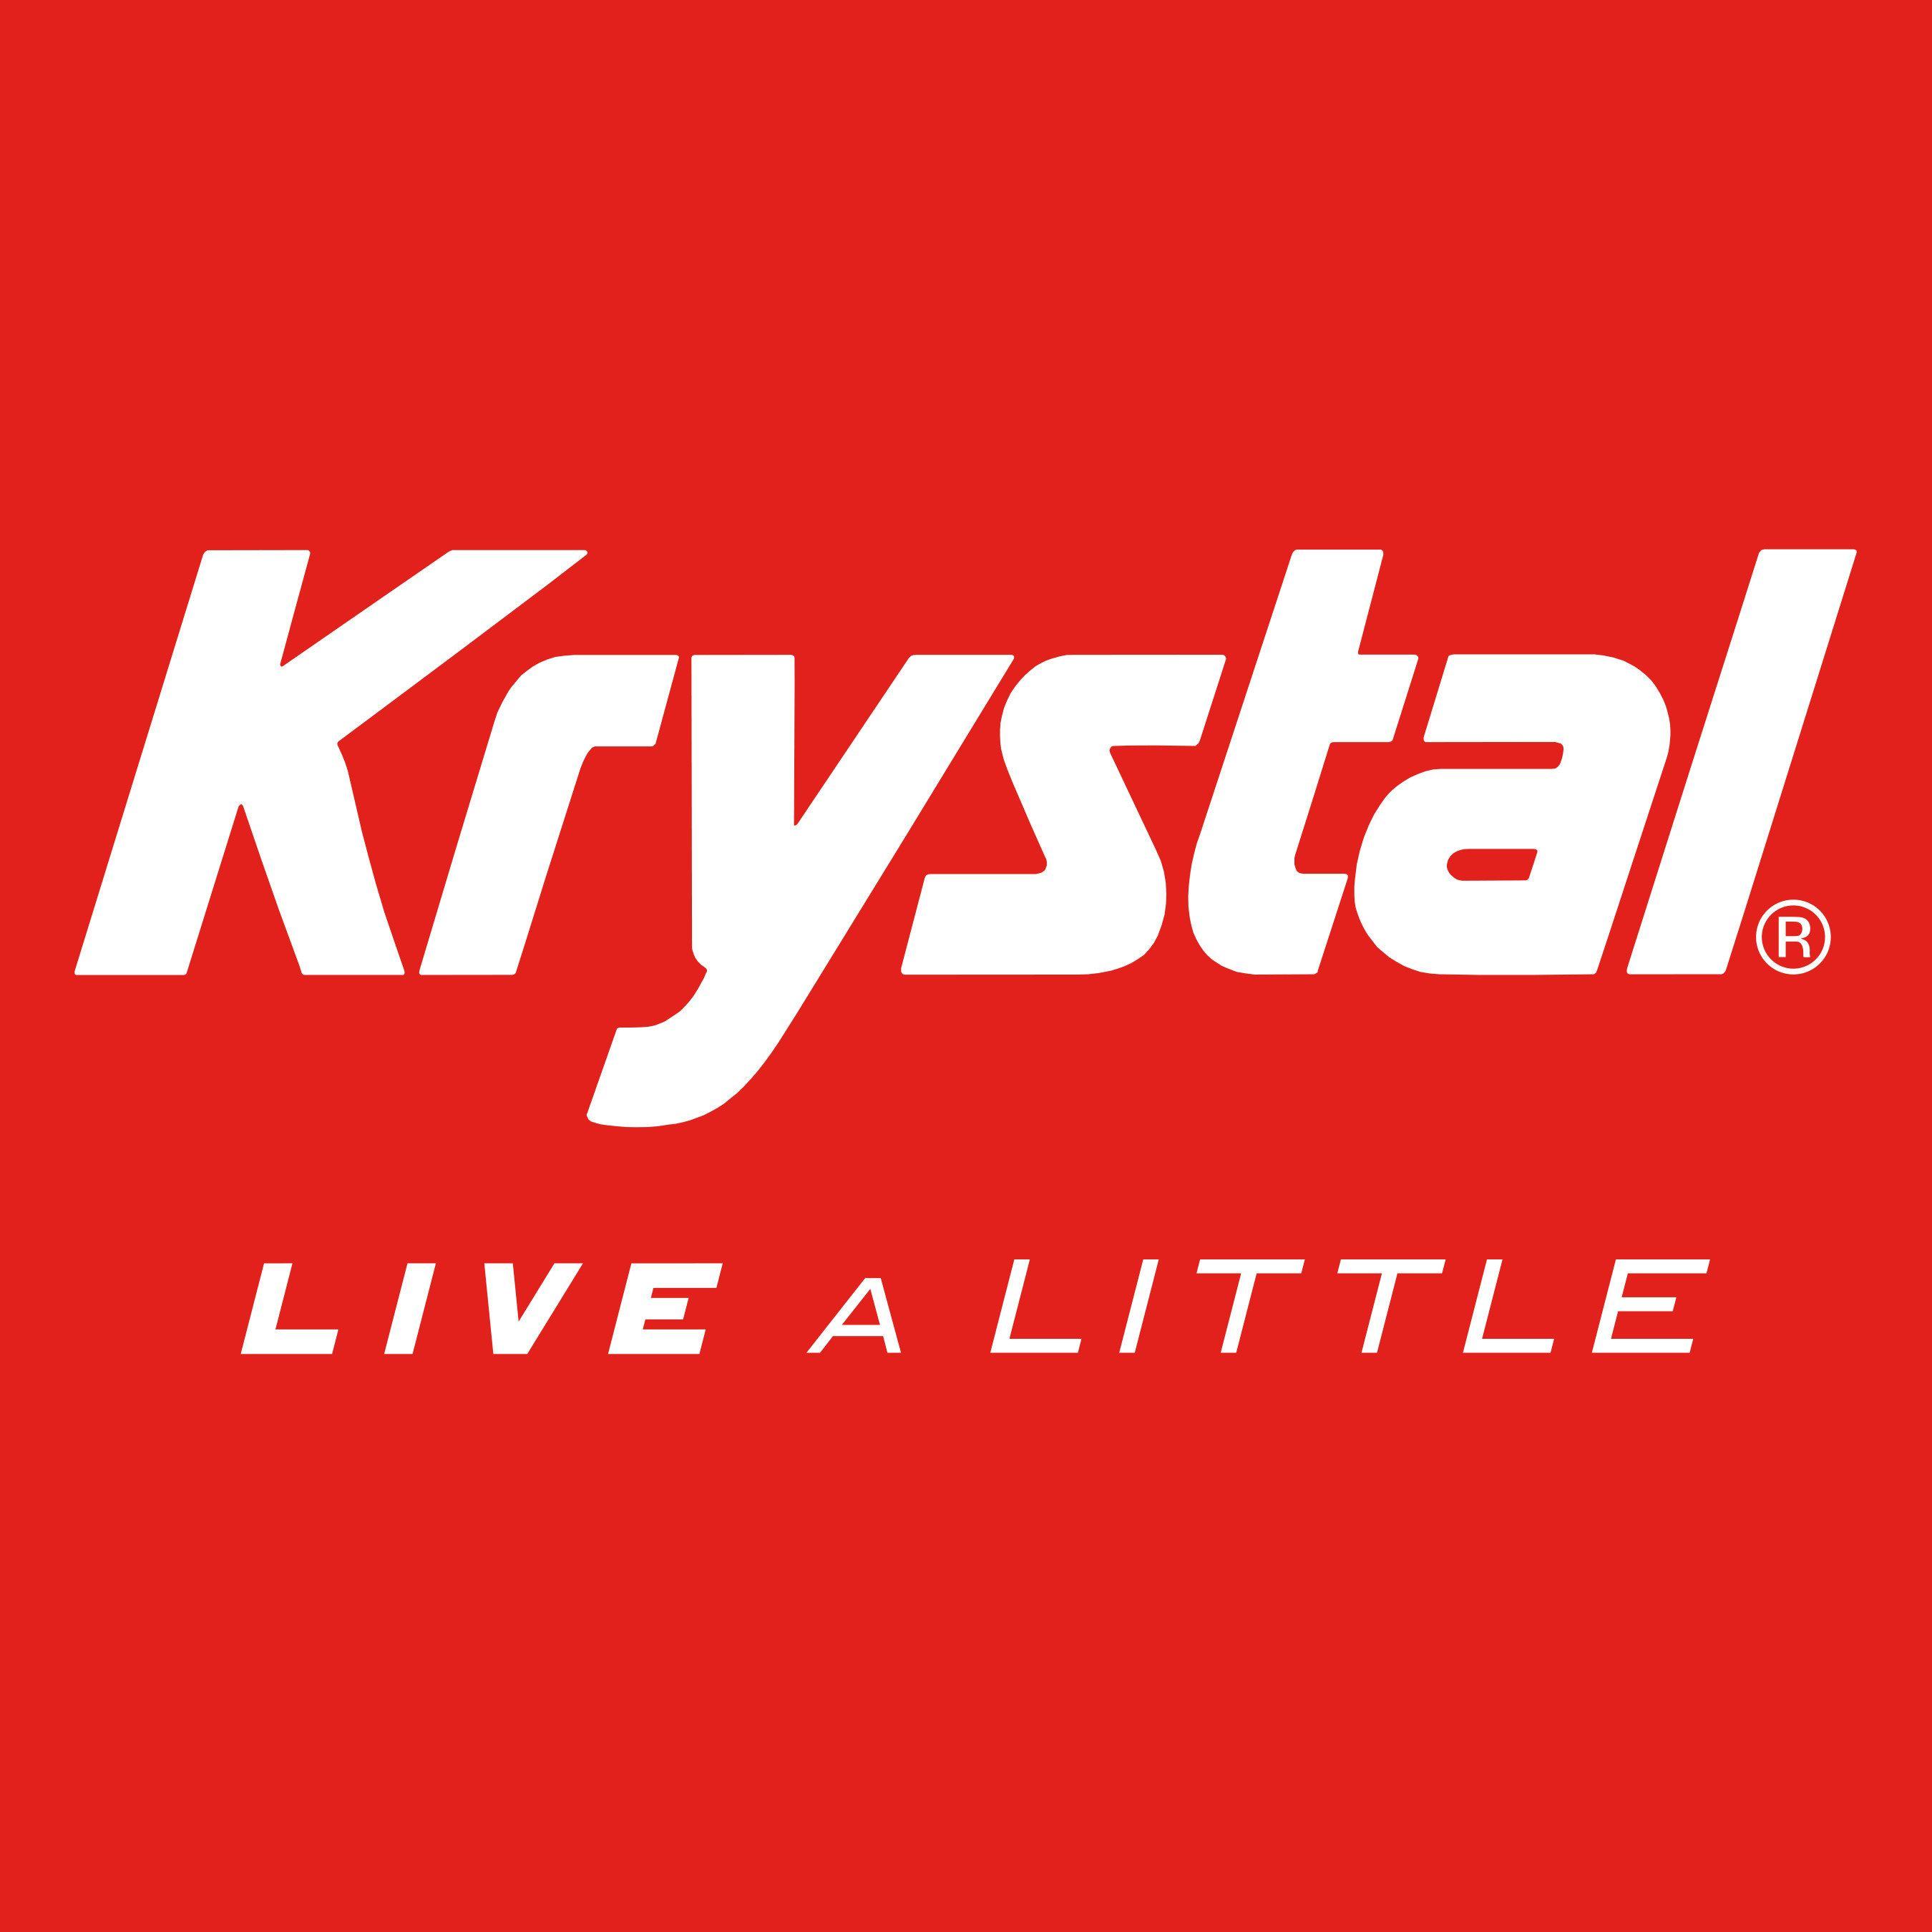 Krystal Logo - Krystal Launches All You Can Eat Krystals And Fries For $5.99